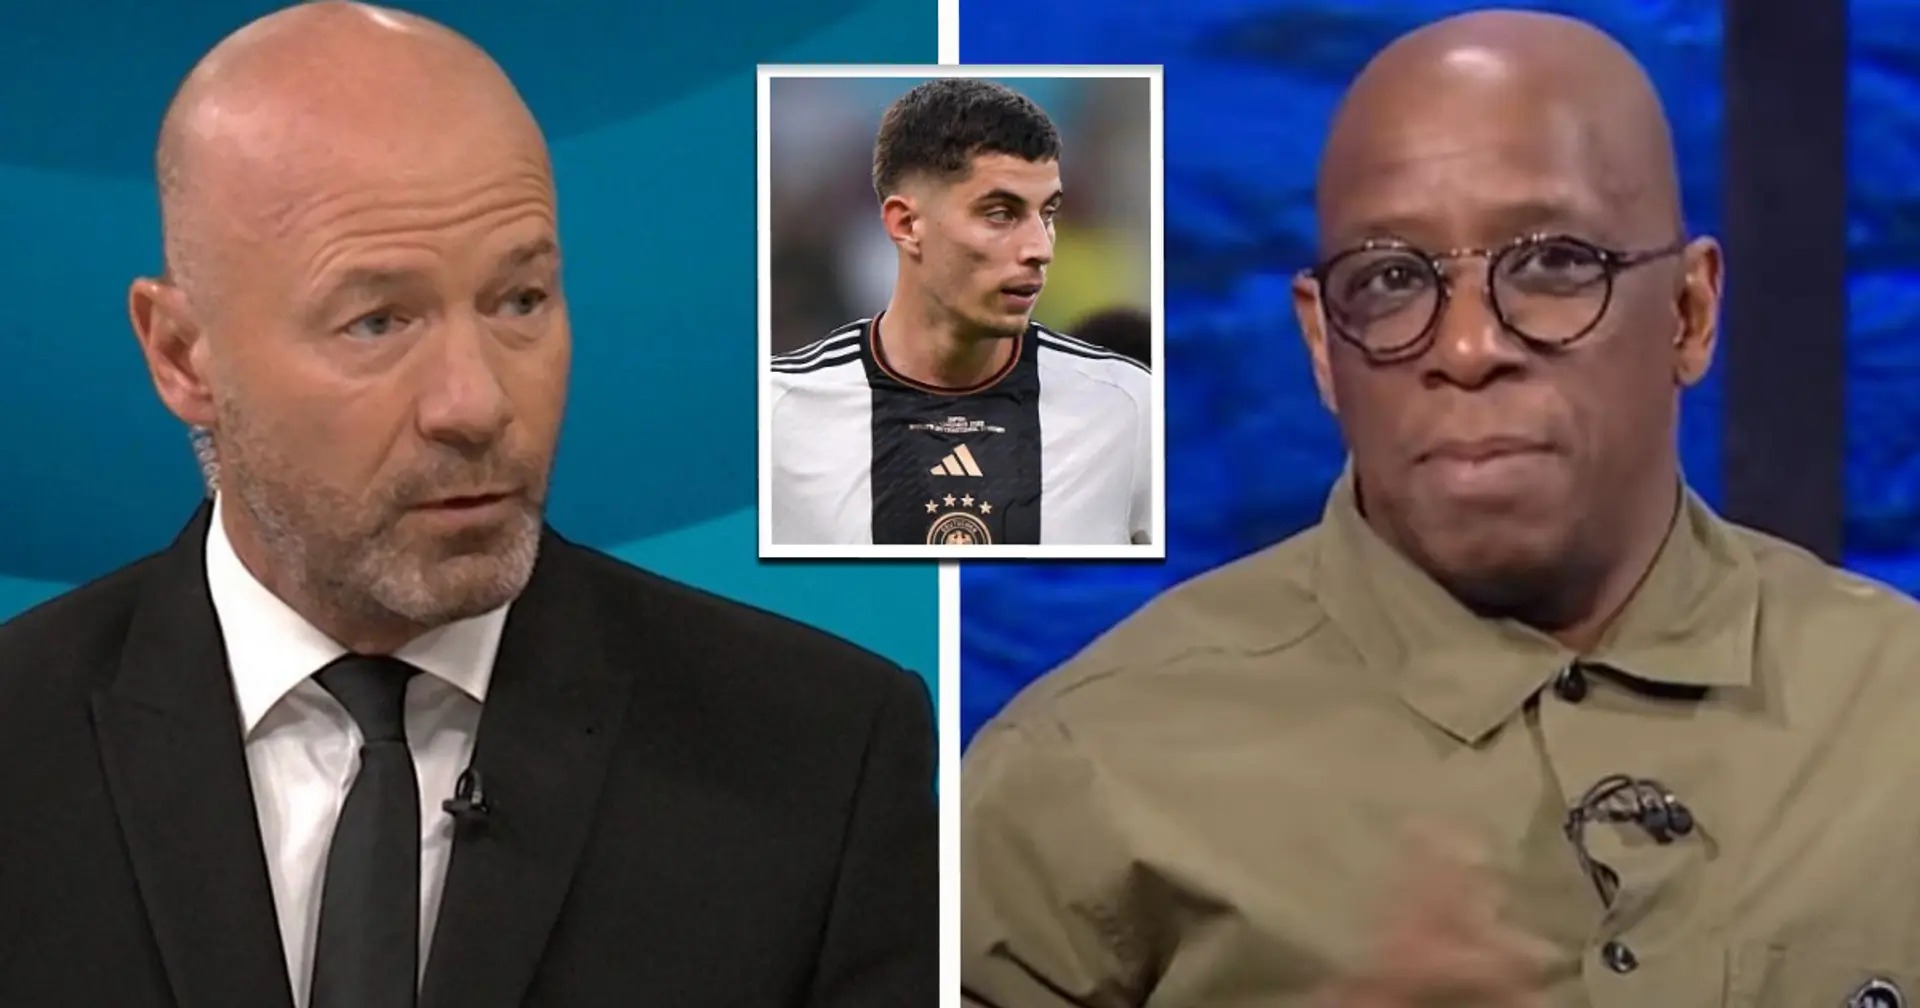 Havertz slammed by pundits after being dropped by Germany